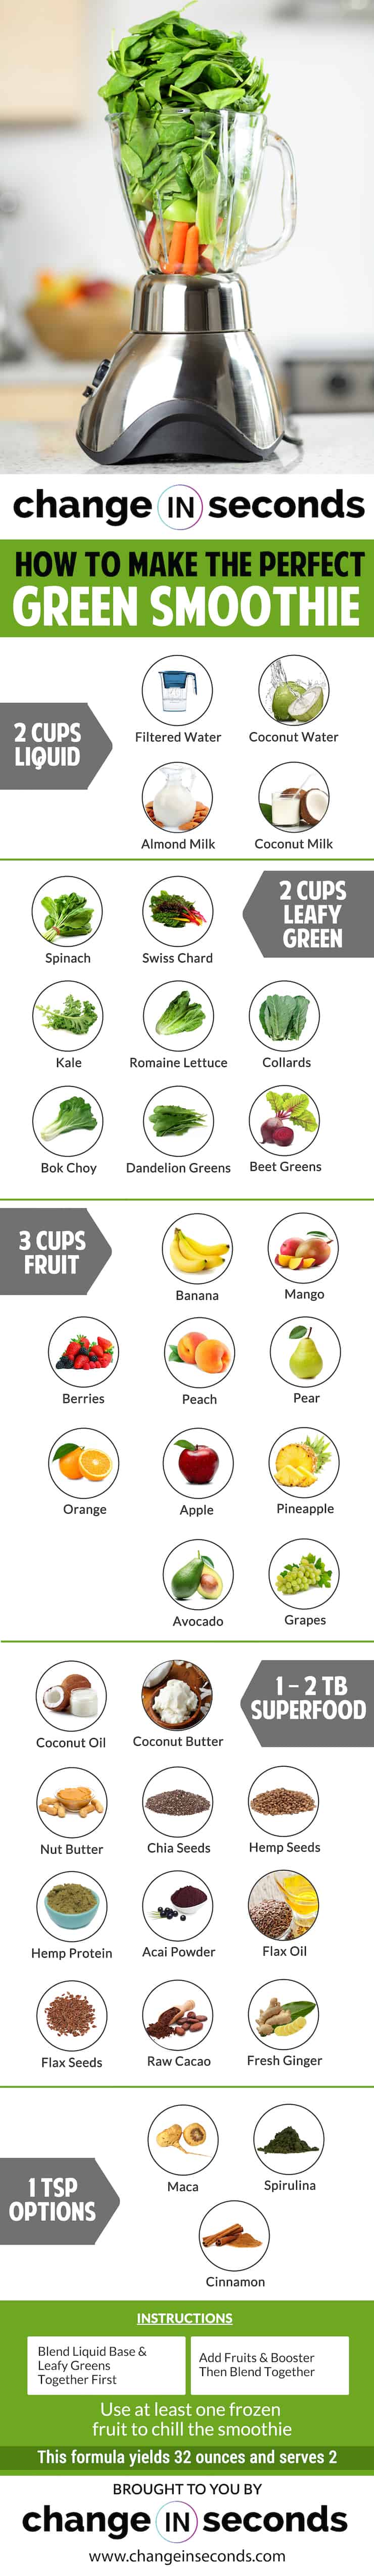 How To Make The Perfect Green Smoothie